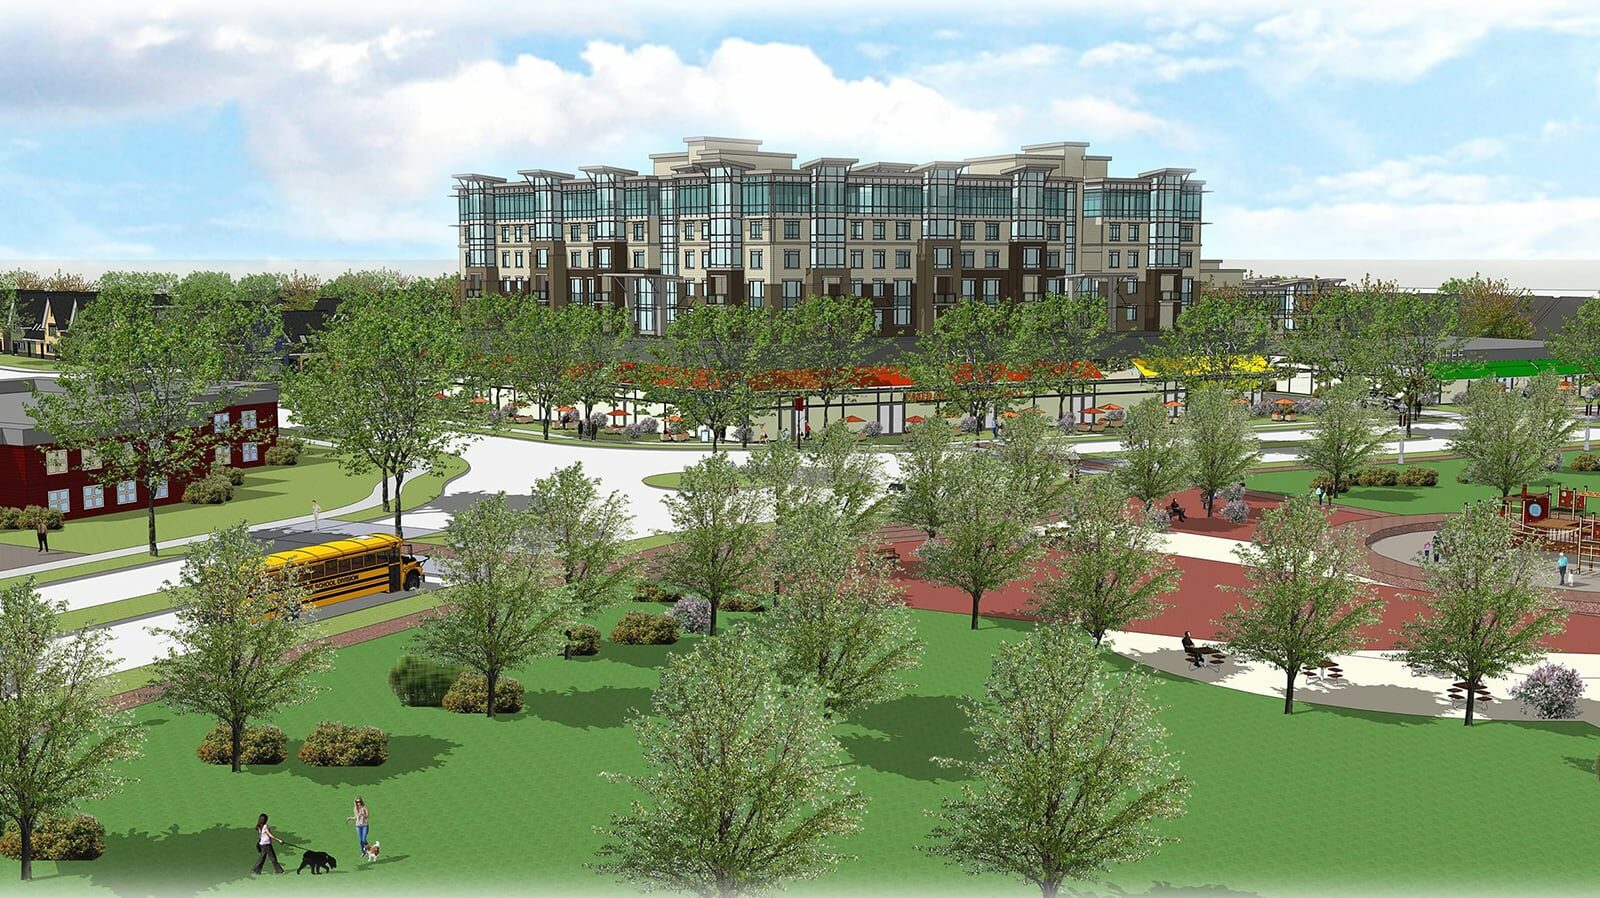 A rendering of Wolf Willow parks and buildings with a school bus.